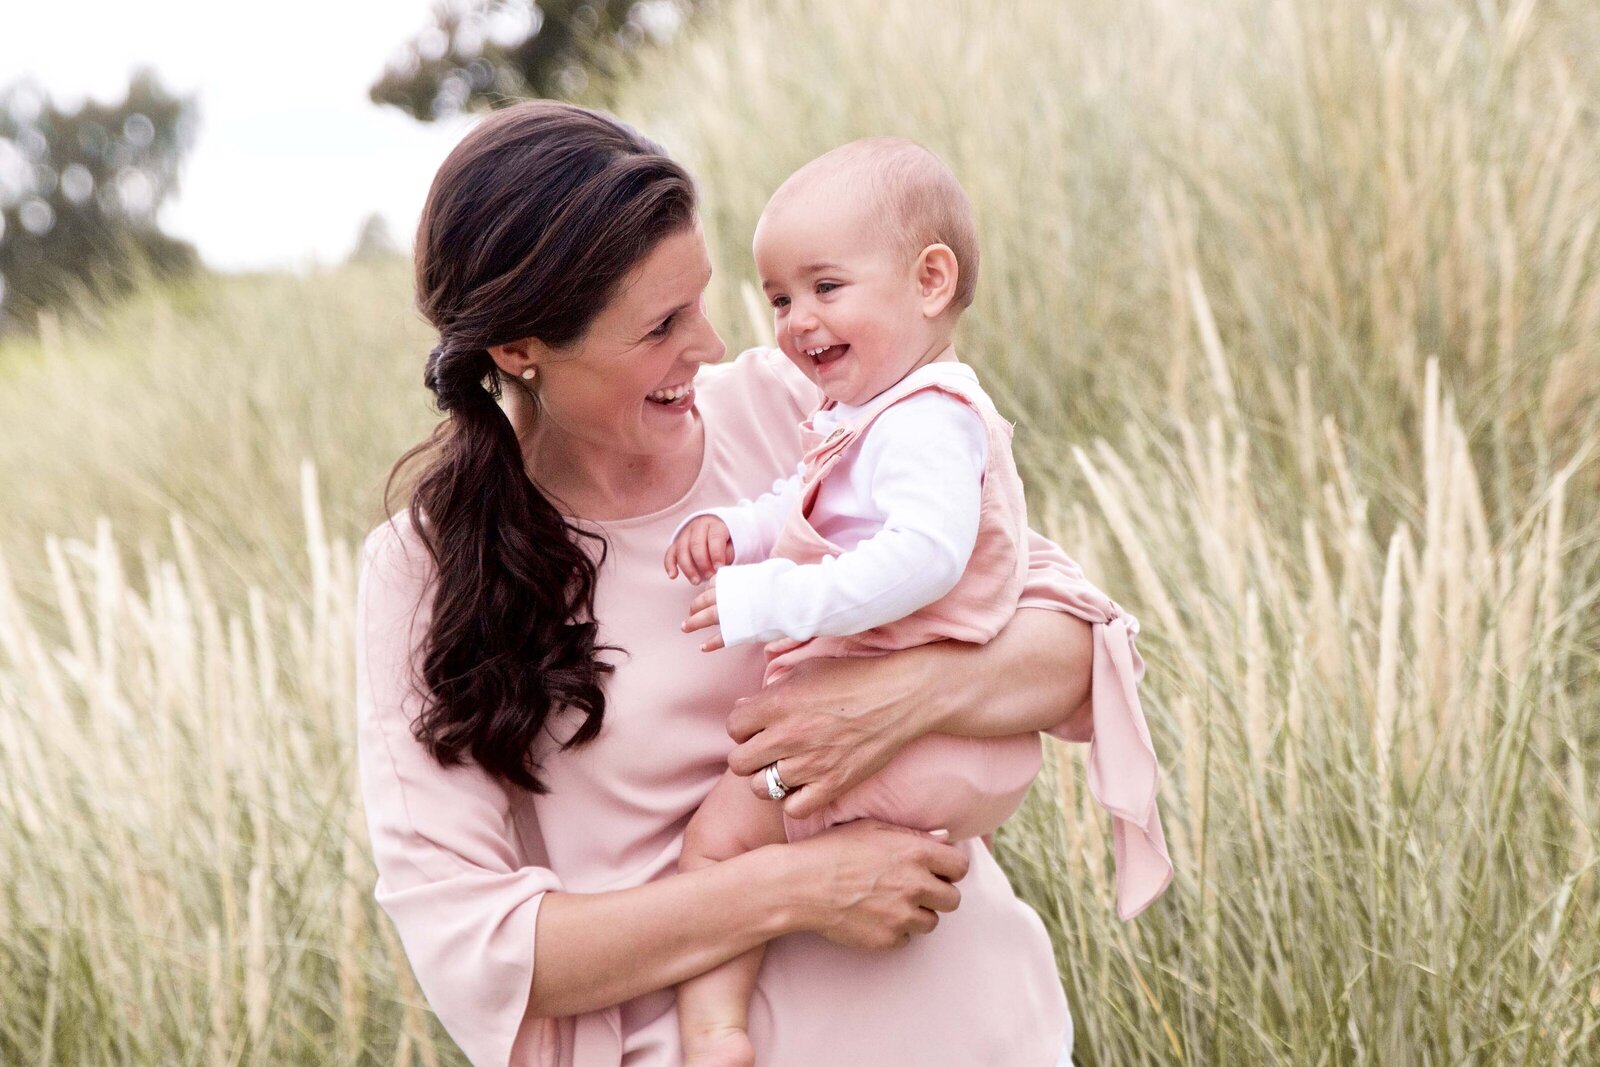 Boho natural mother and baby in a field photography kid's clothing boutique coordinating pink outfits